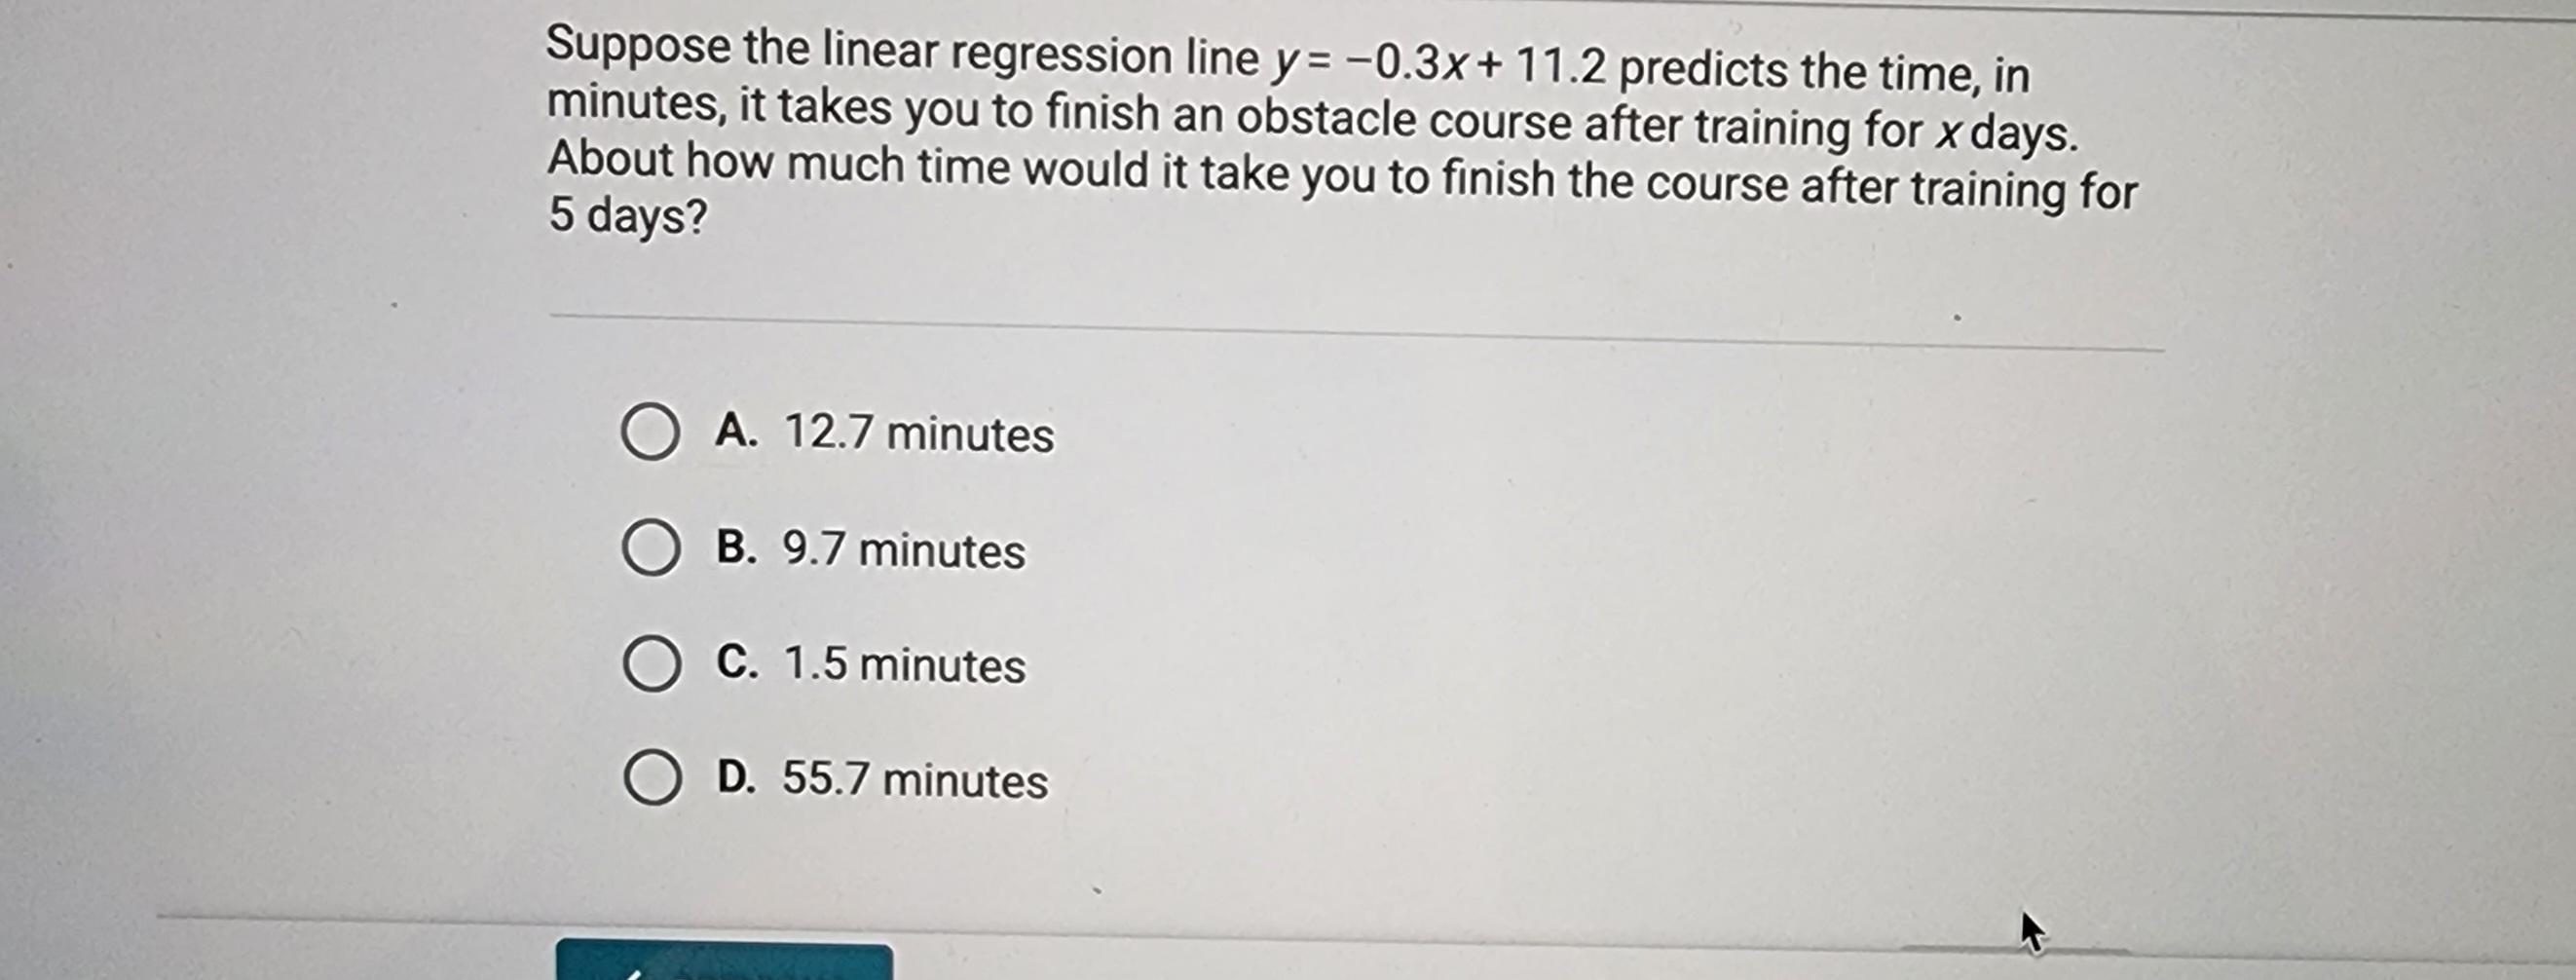 Suppose The Linear Regression Line Y=-0.3x+11.2 Predicts The Time, In Minutes, It Takes You To Finish